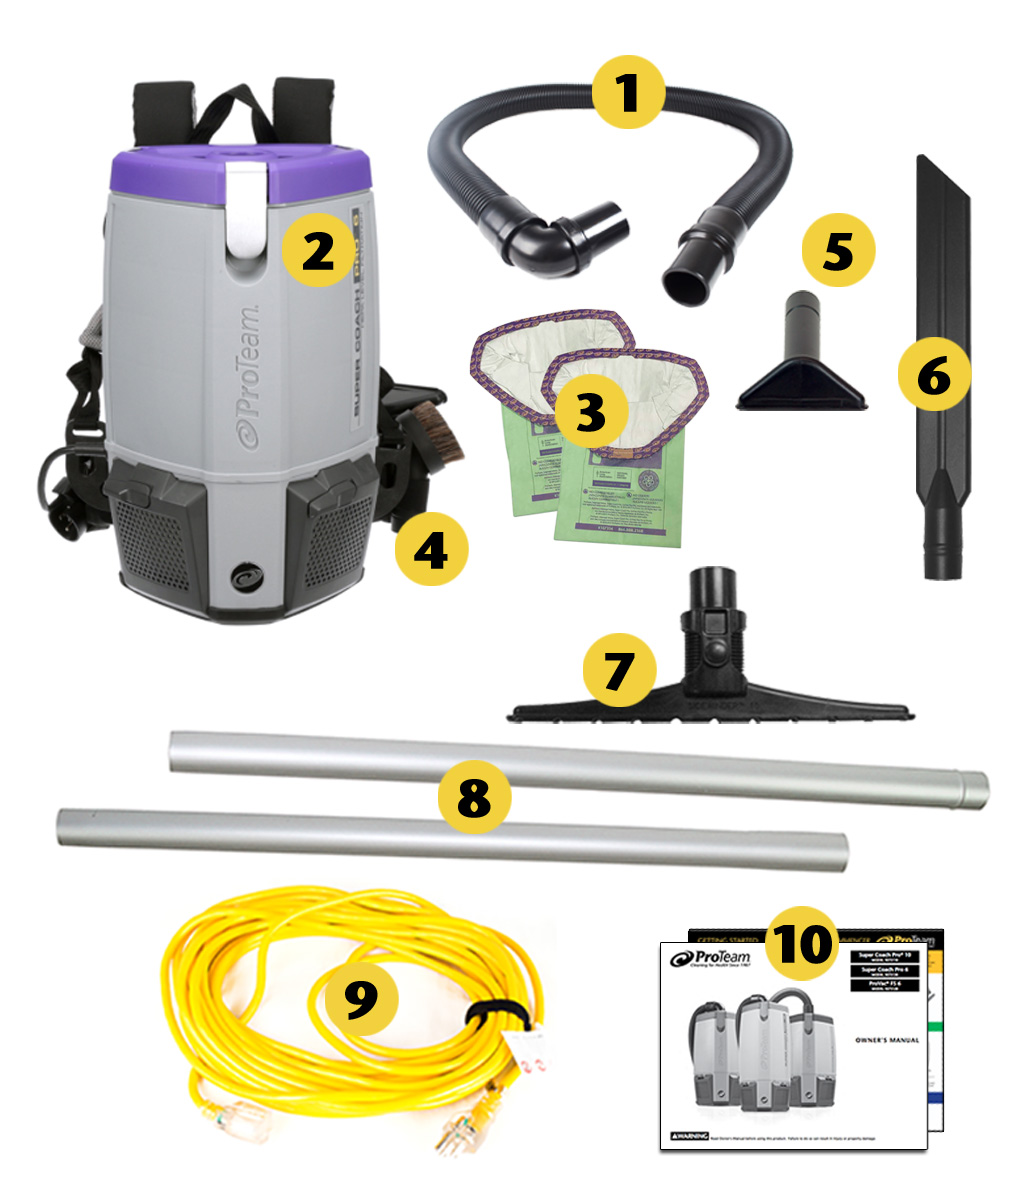 Image of what is included in the box of ProTeam Super Coach Pro 6, 6 quart backpack vacuum